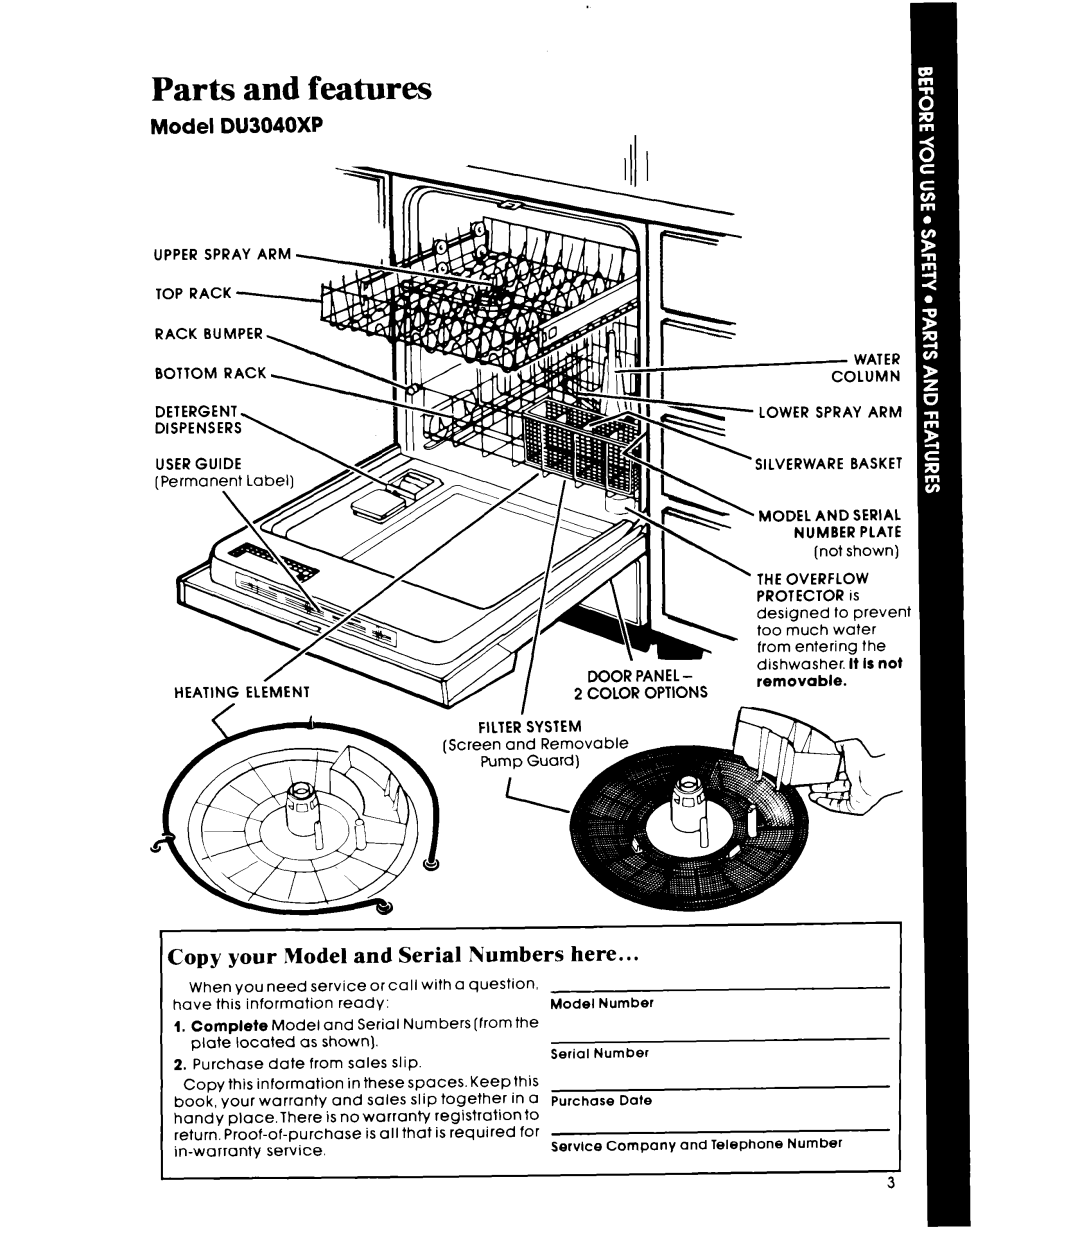 Whirlpool manual Parts and features, Copy your Model and Serial Numbers here, Model DU3040XP 